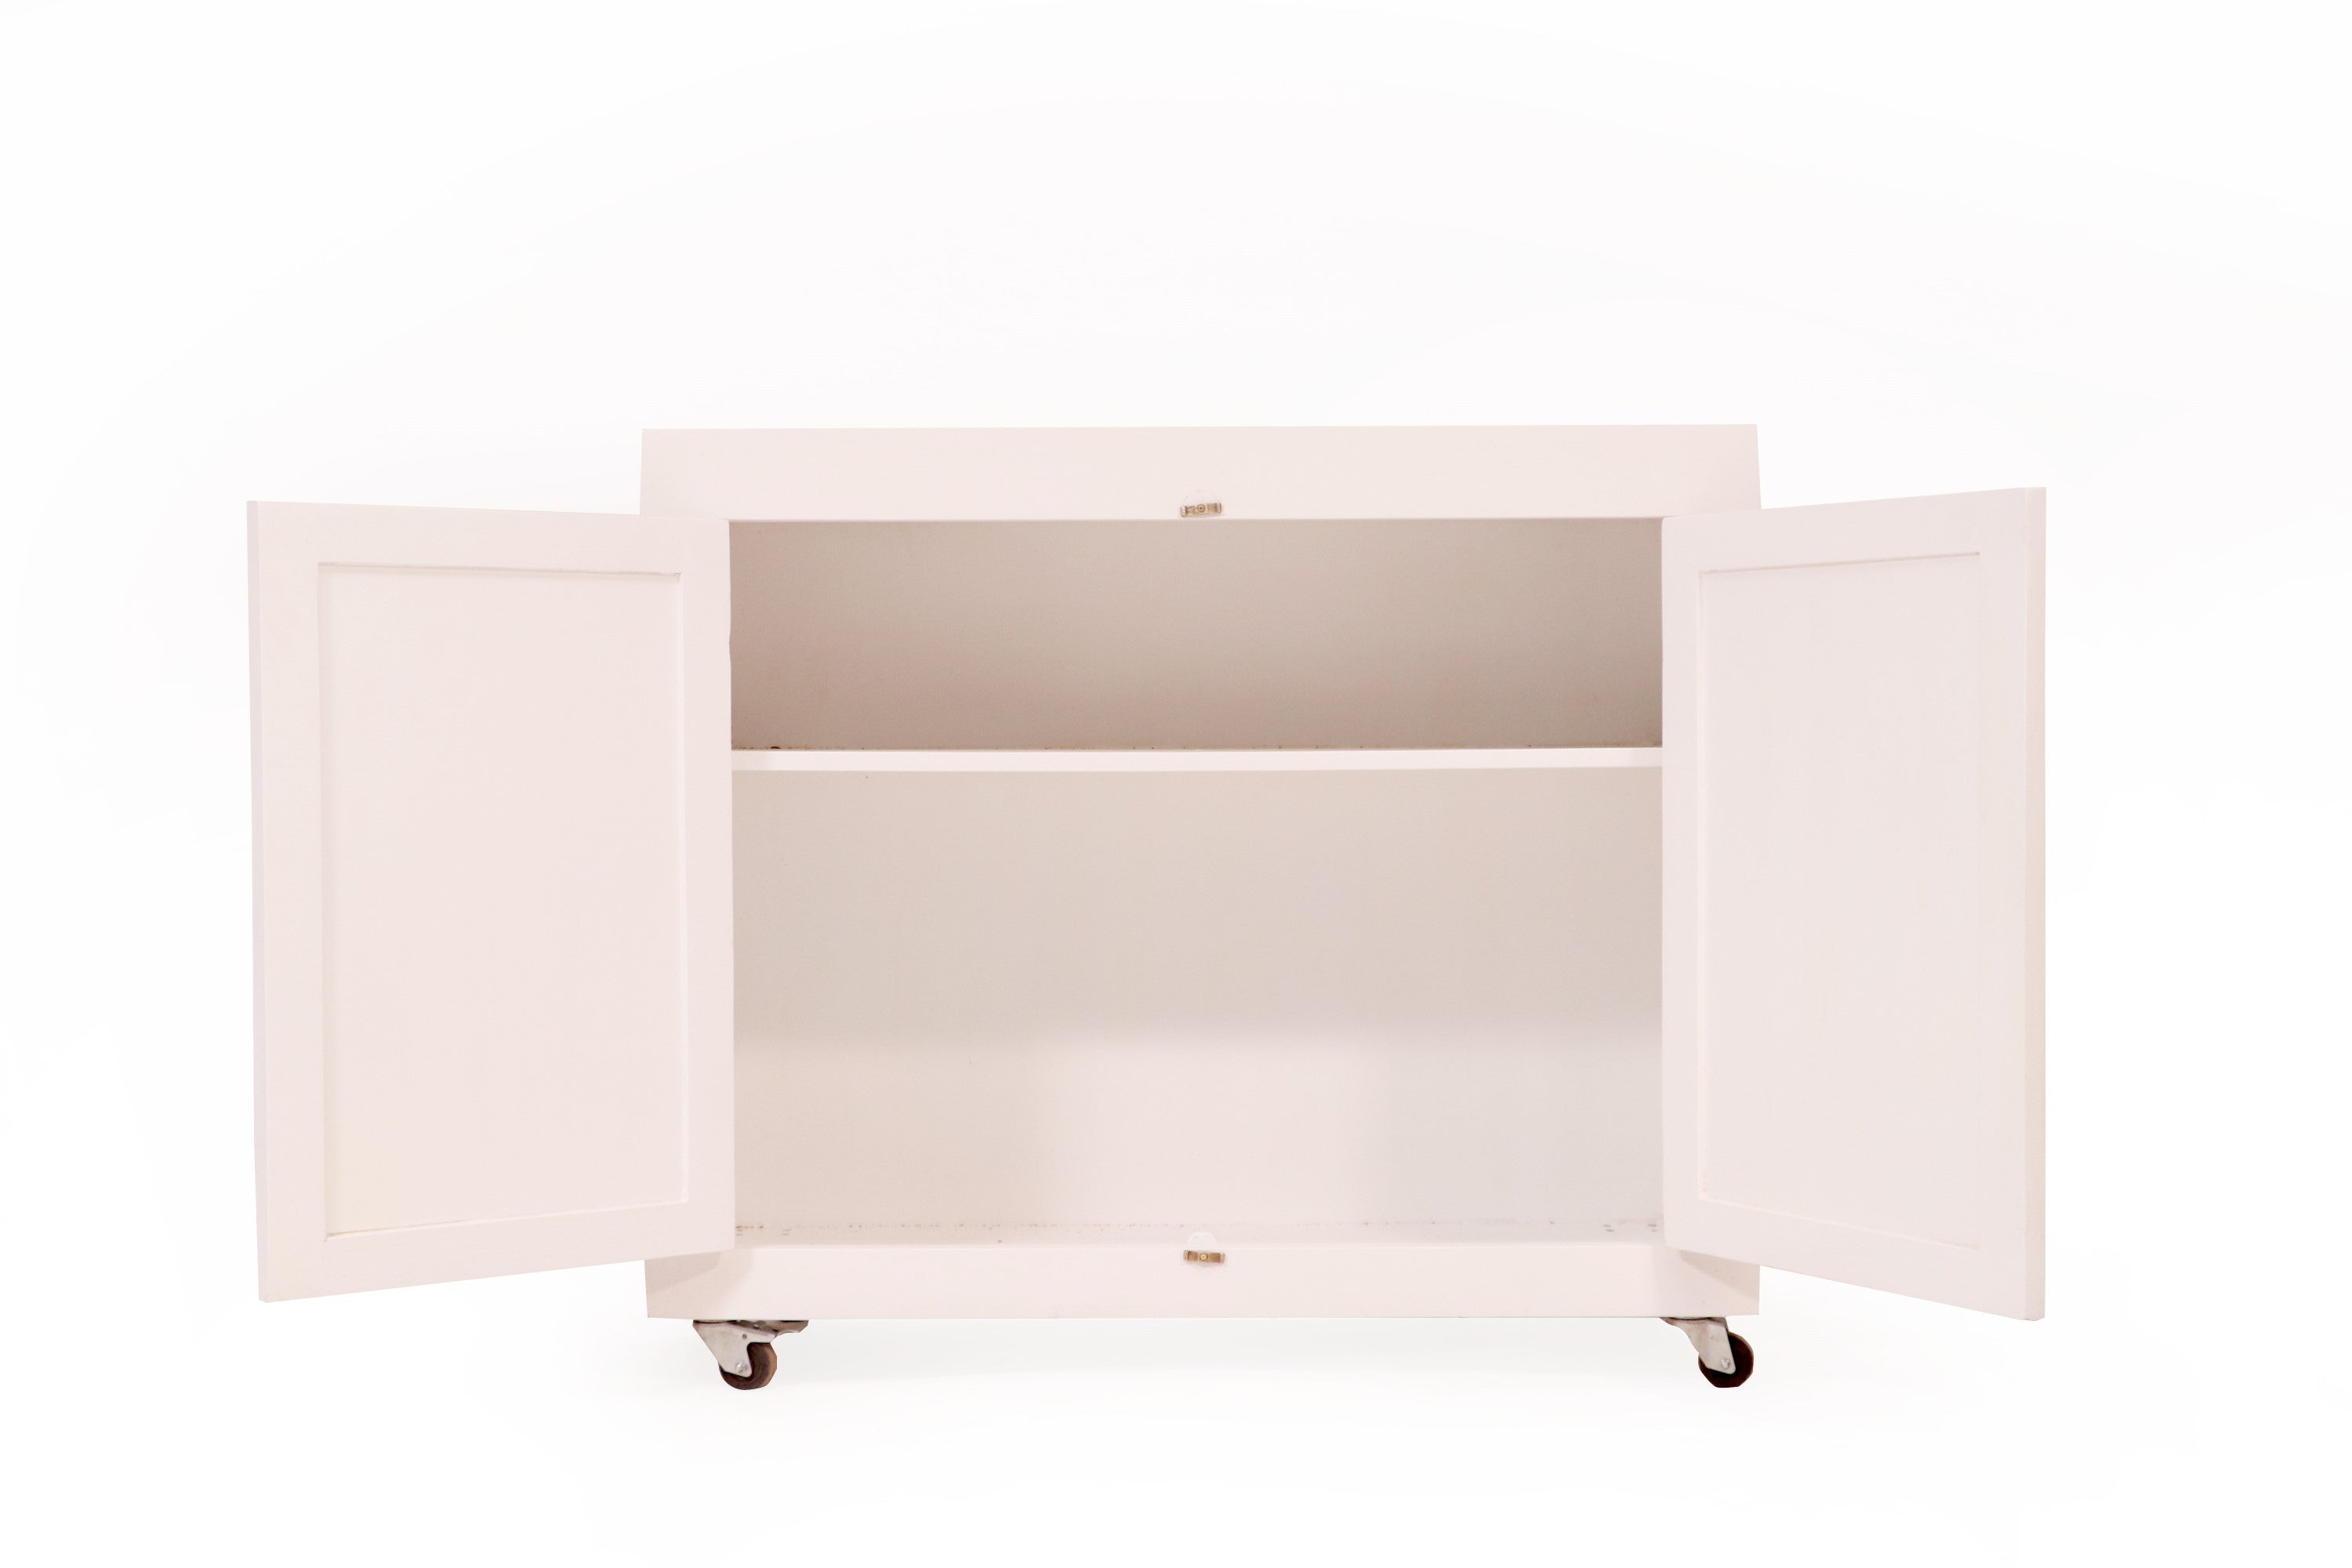 2 Door Classical White Moveable Cabinet Cupboard